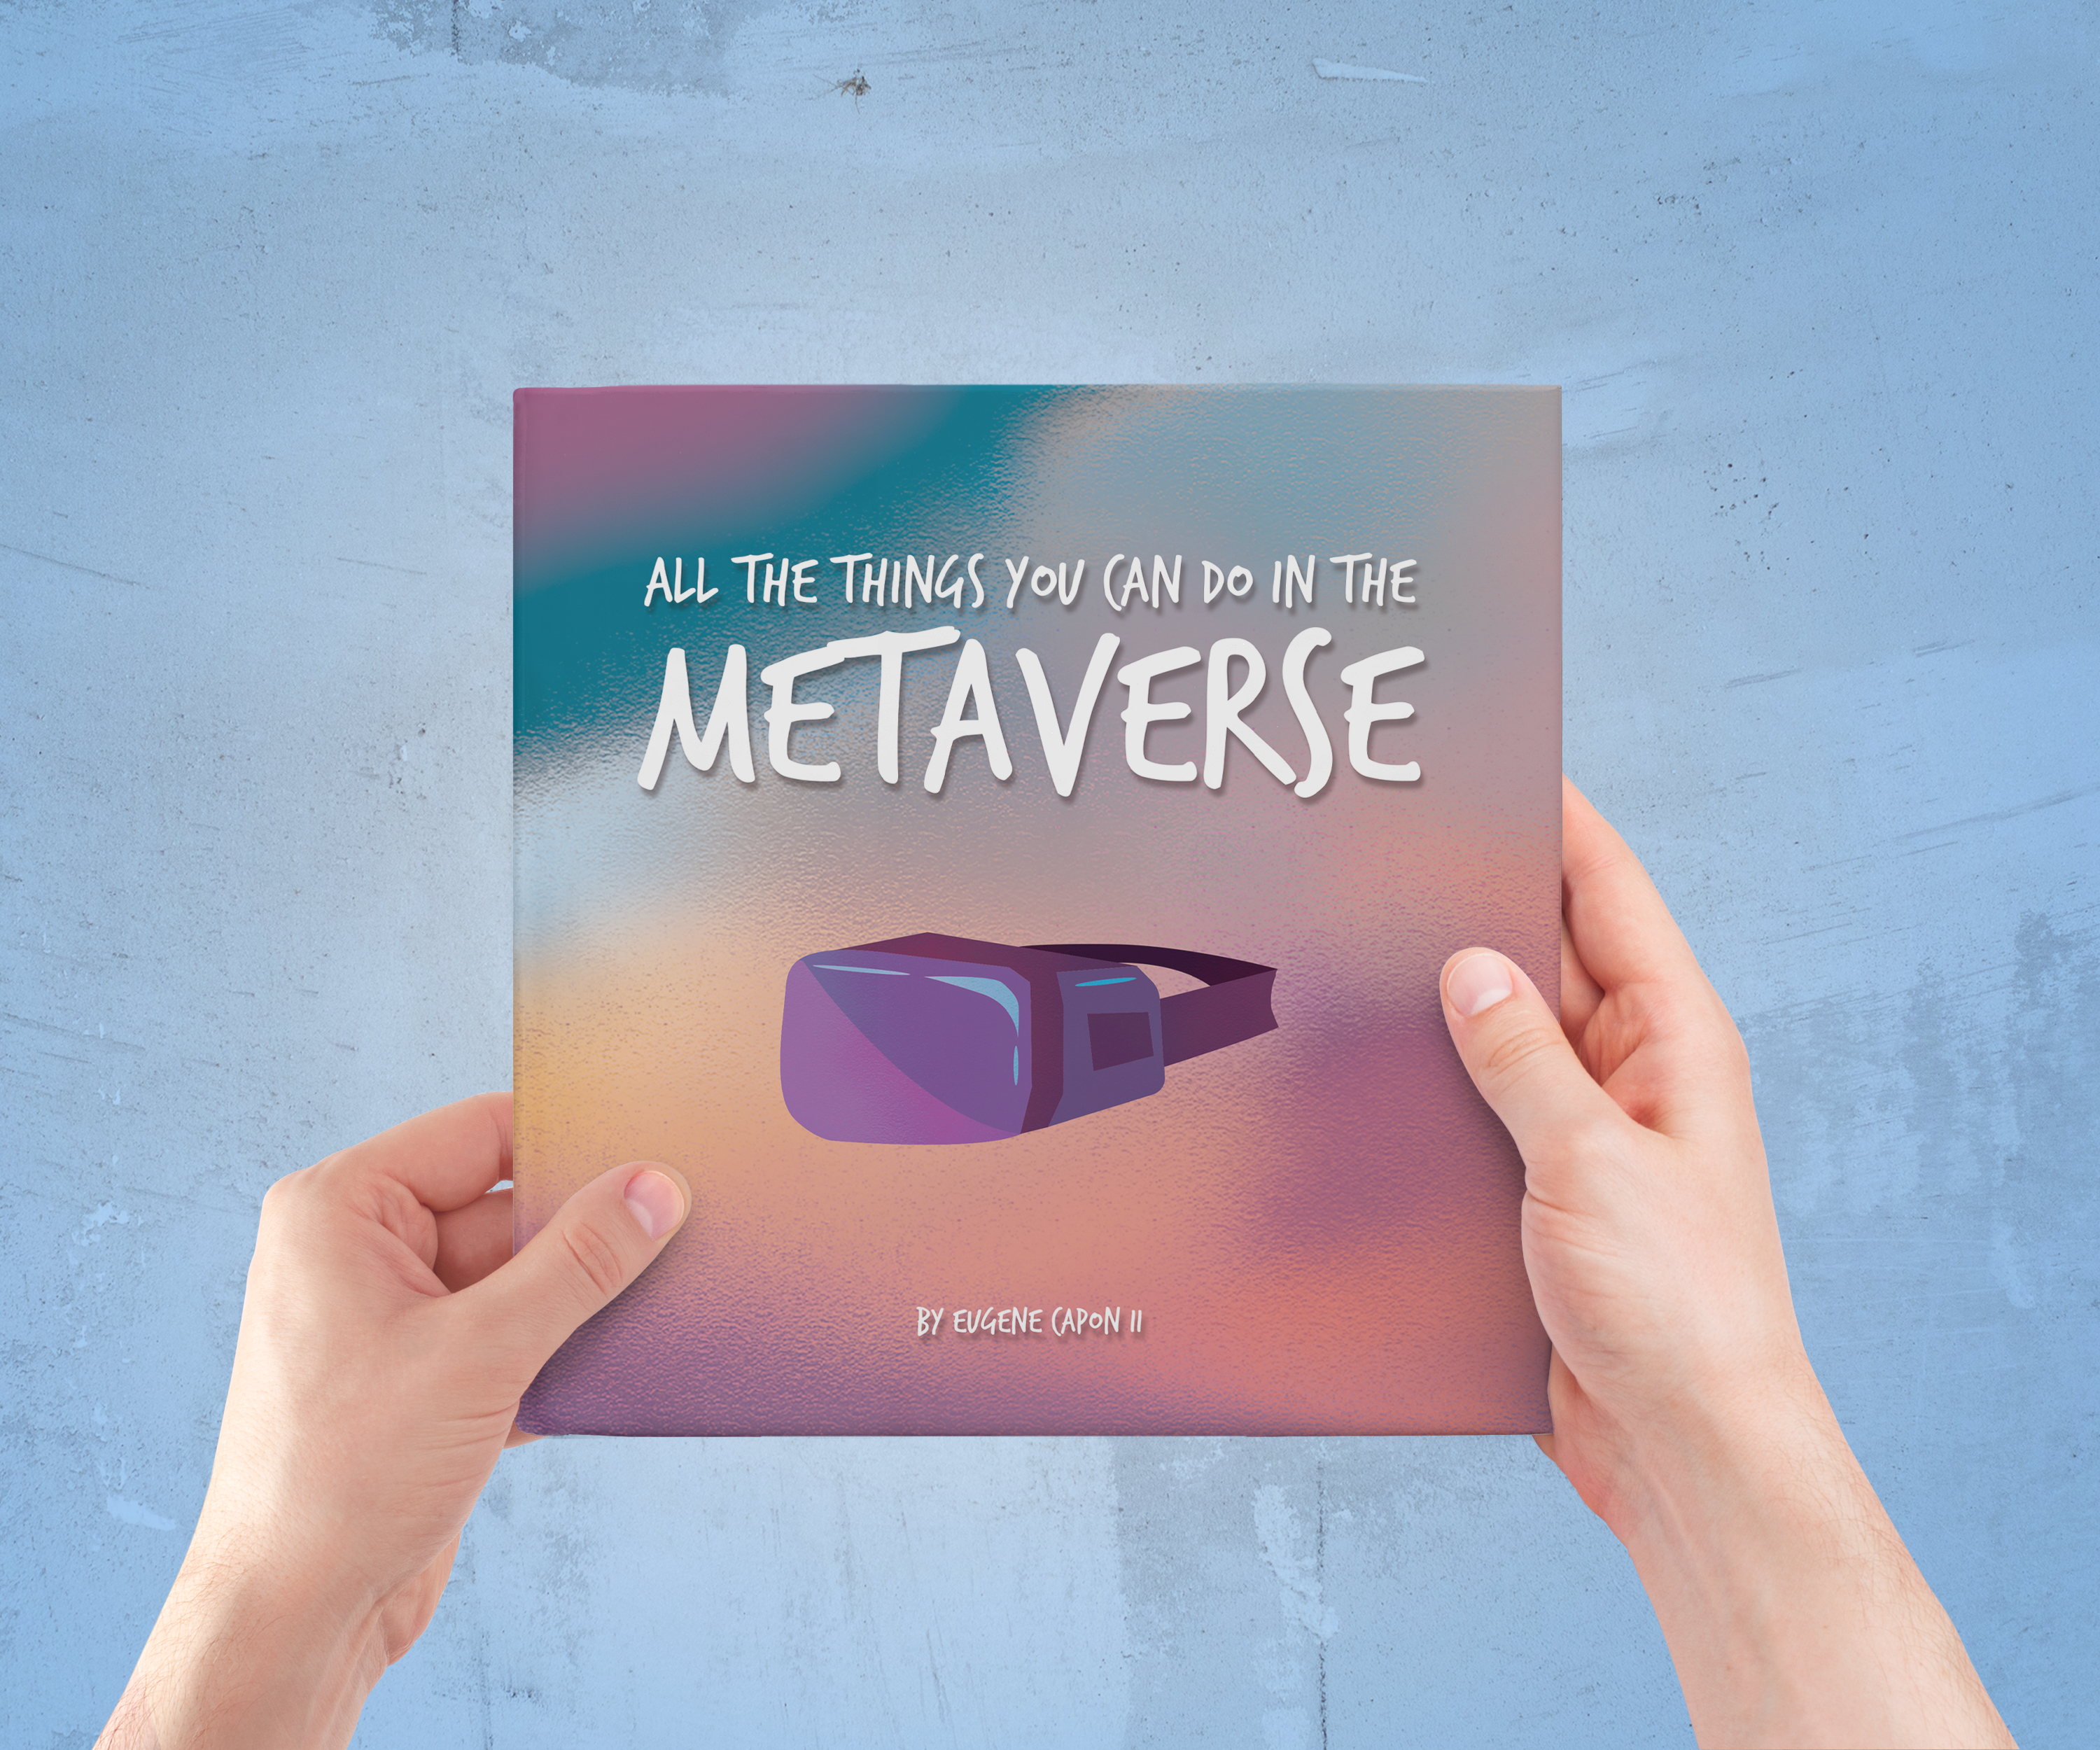 All The Things You Can Do In The Metaverse